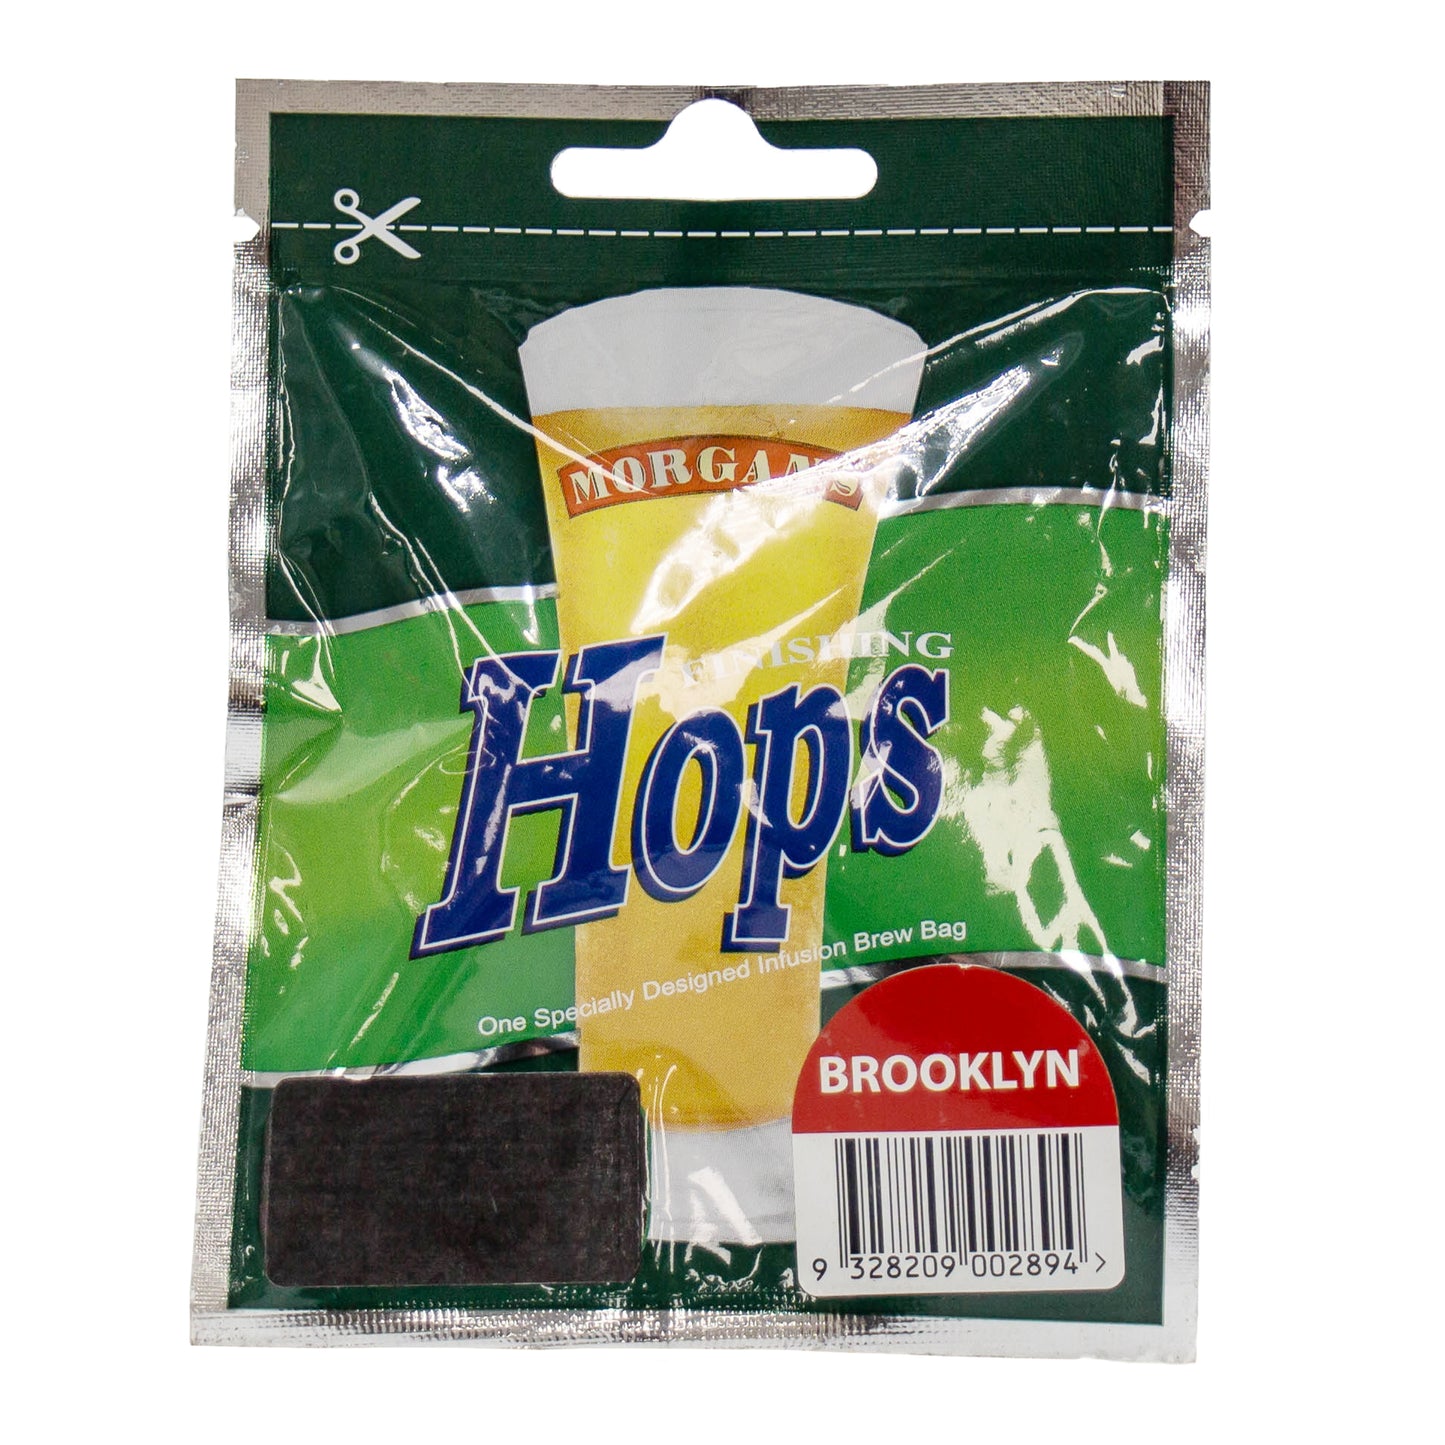 12g packet of Brooklyn Hops for home brewing